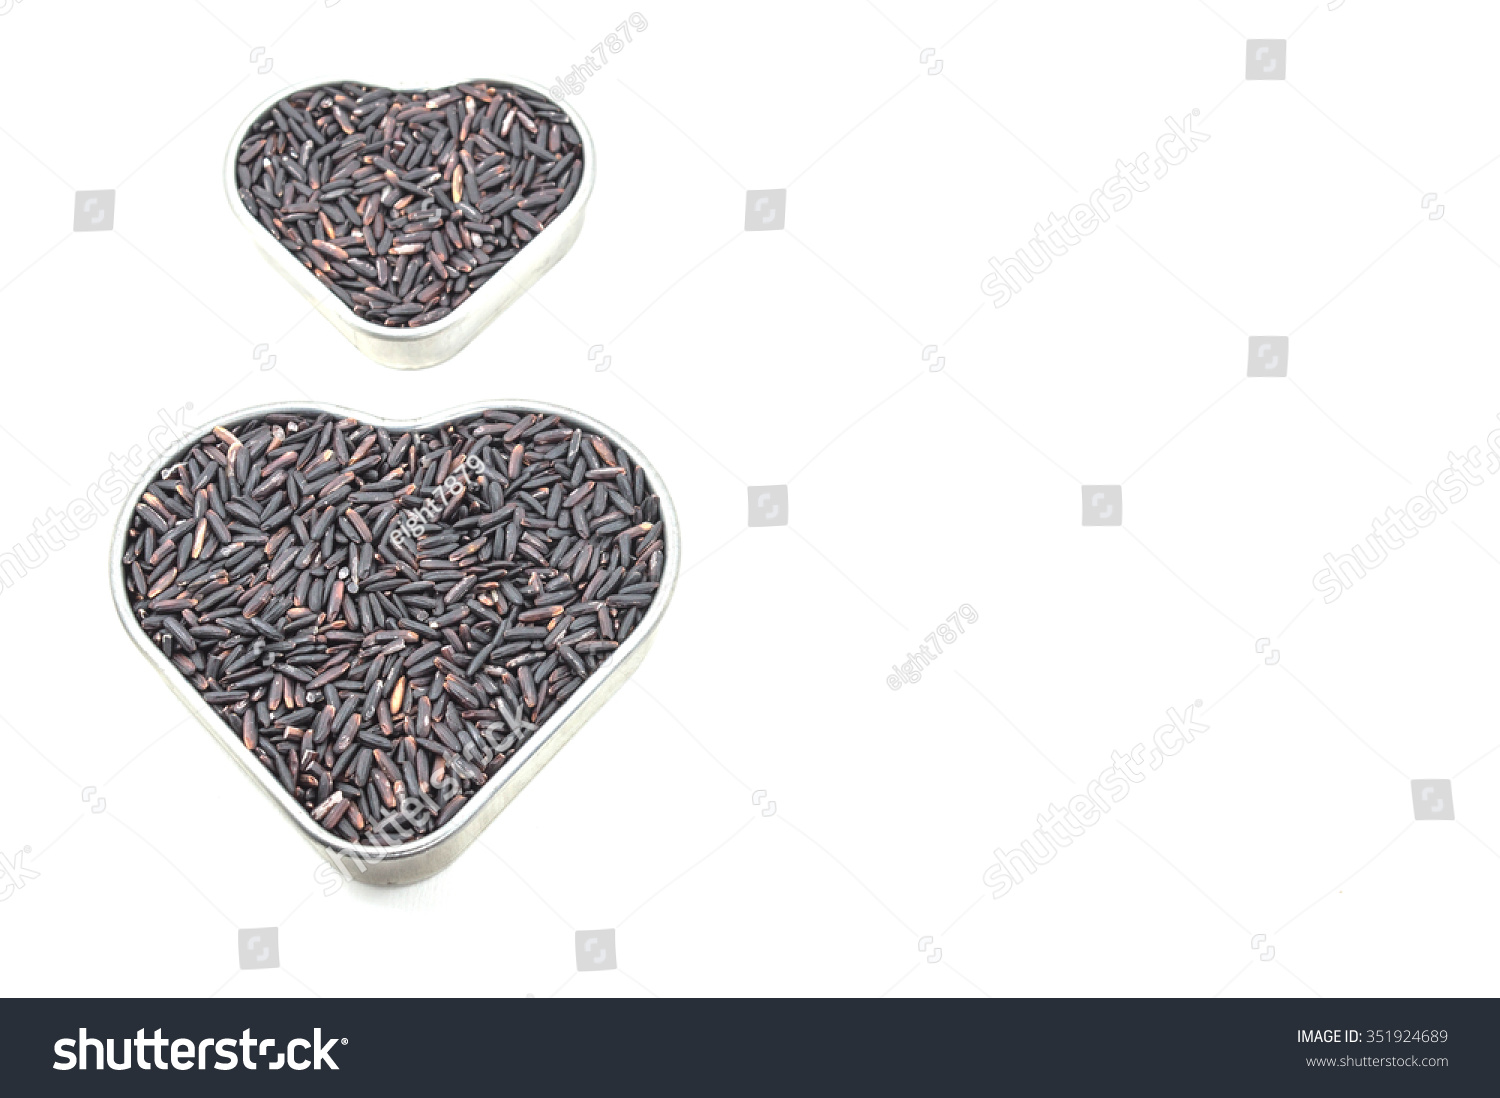 Rice berry in the heart box on the white background #351924689